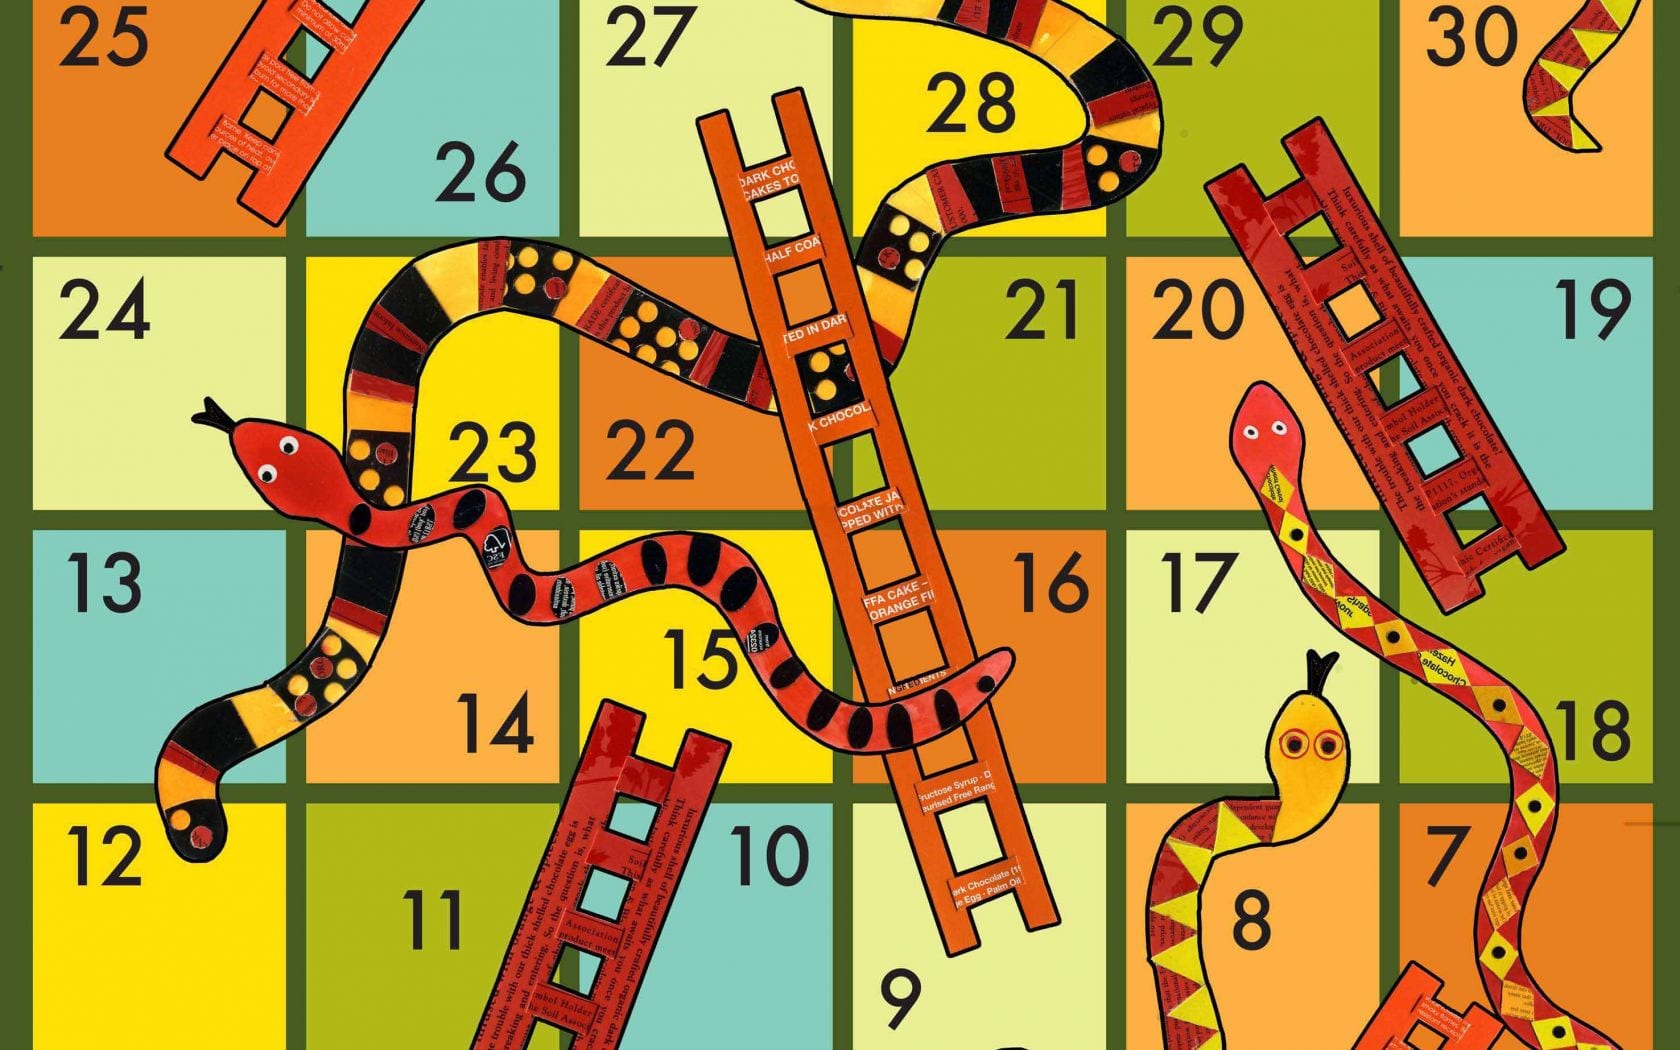 Snakes and ladders Game of Life